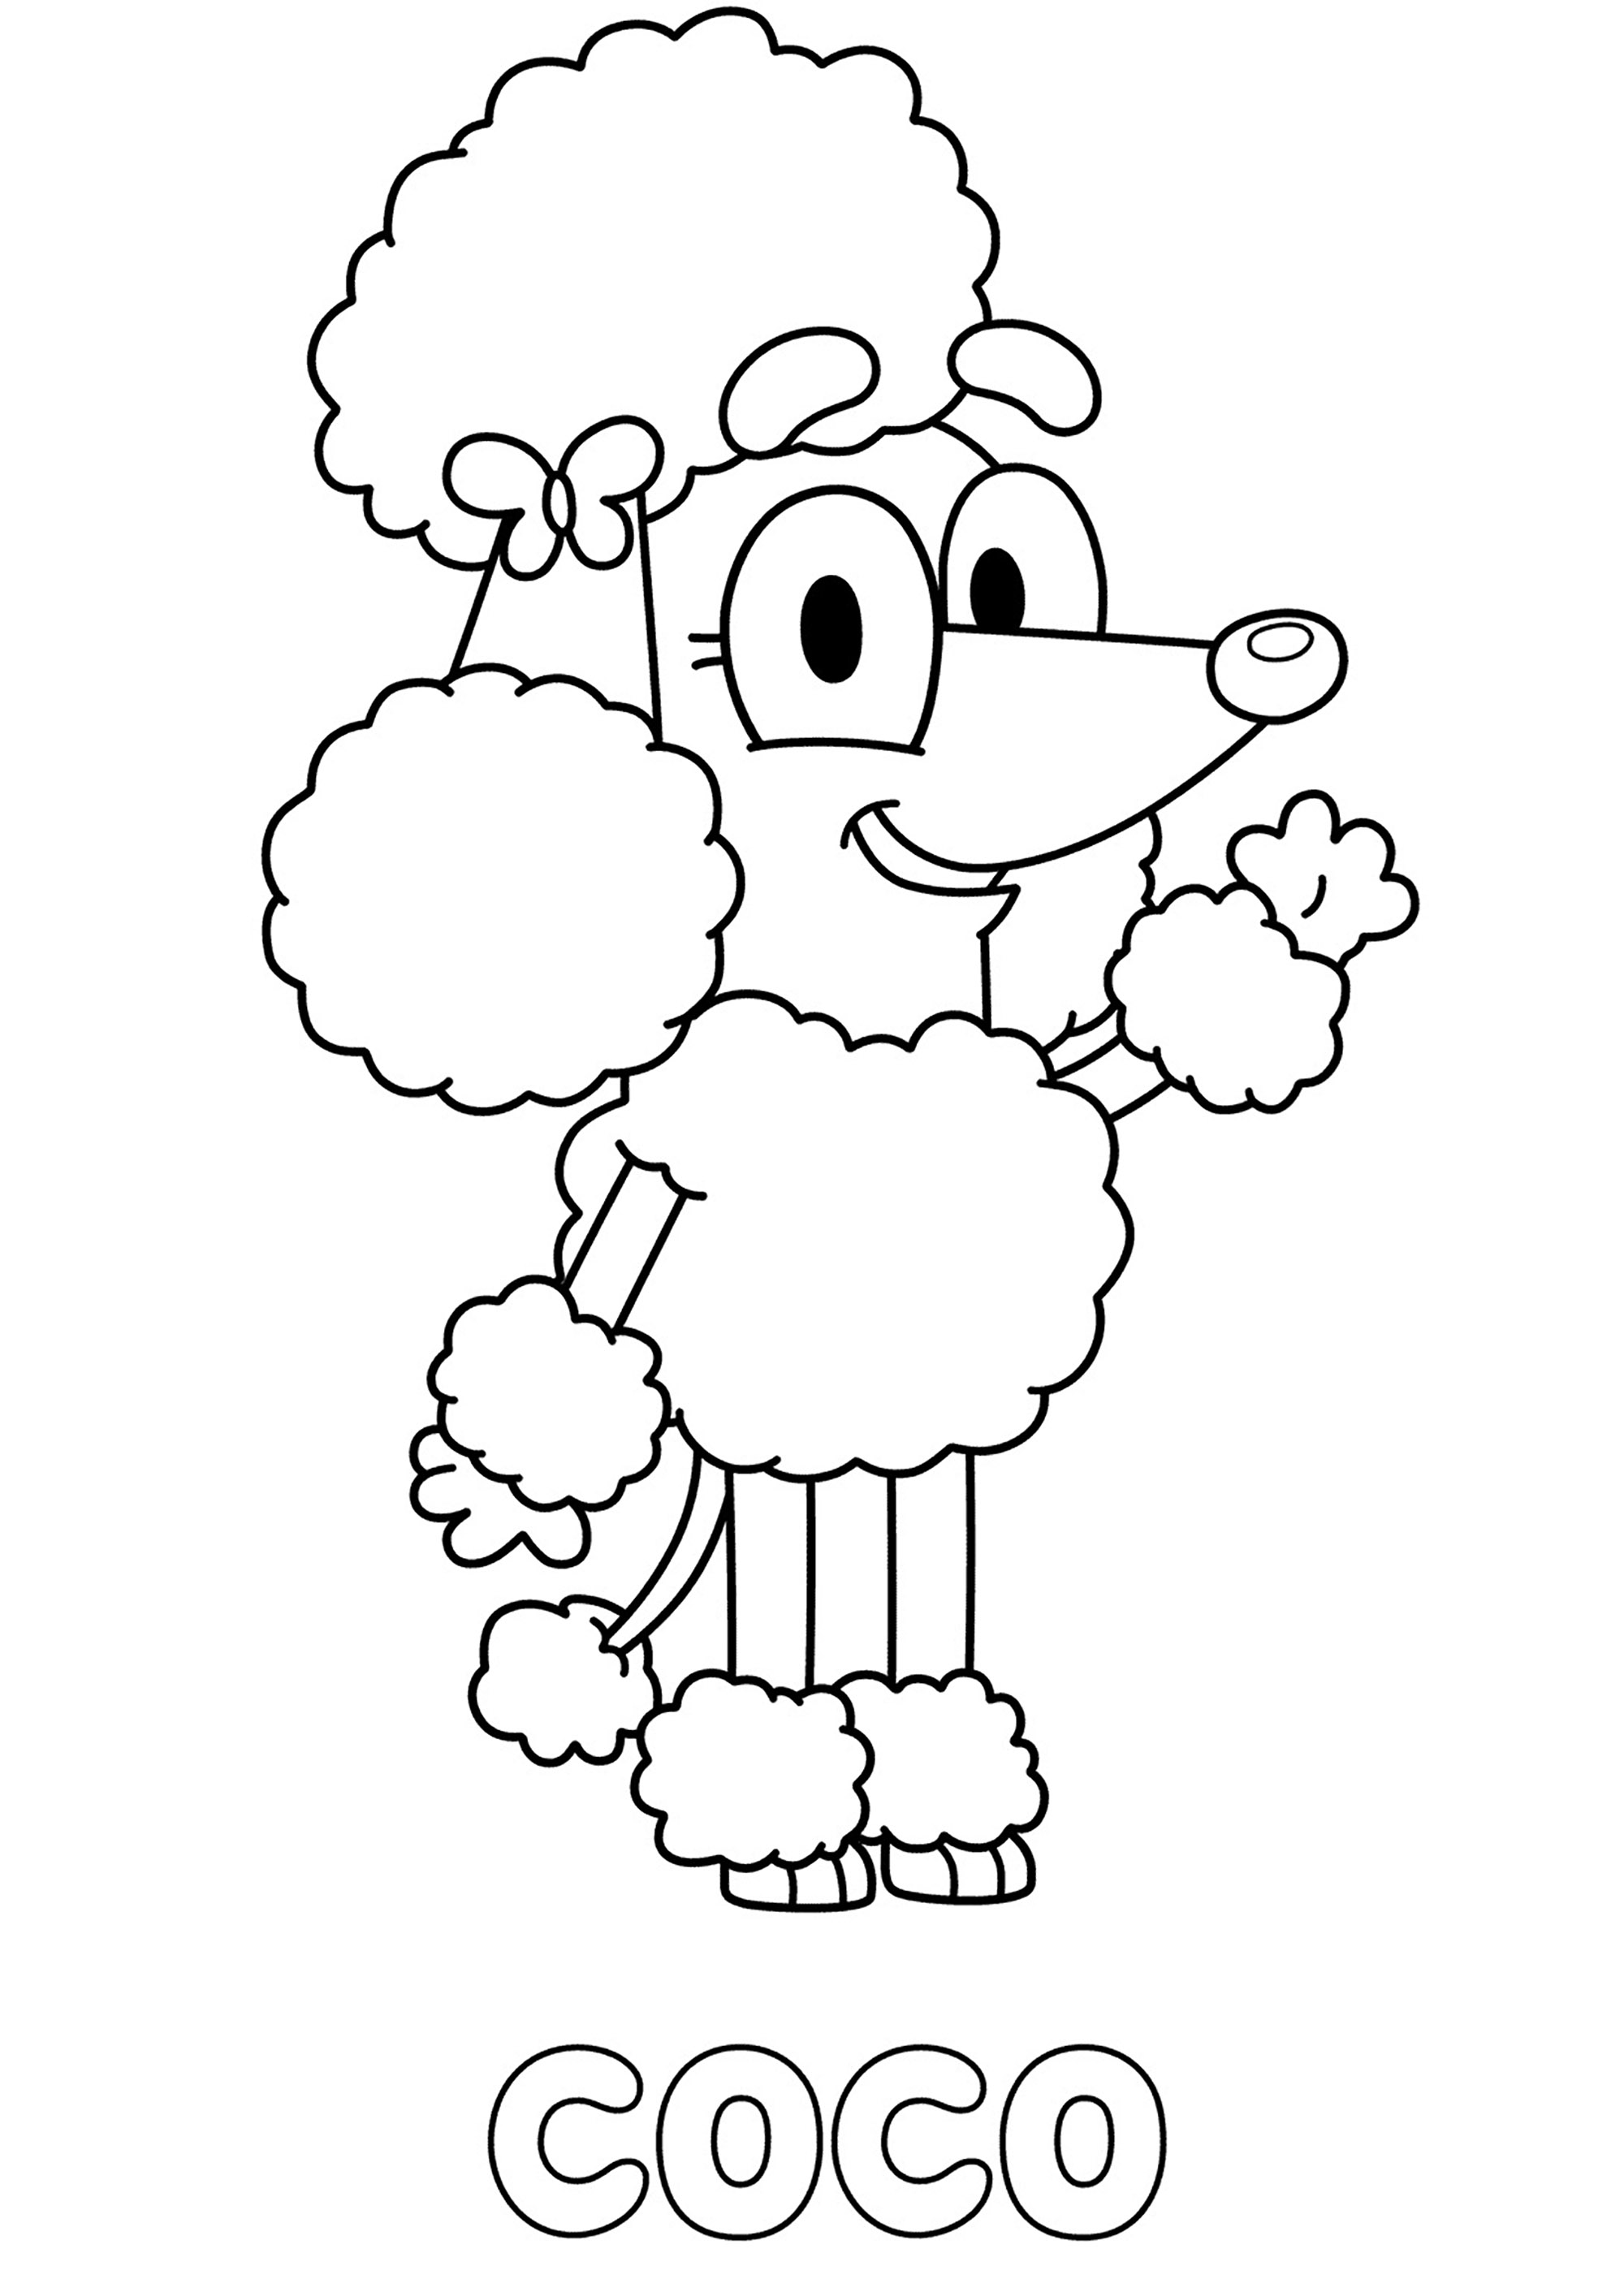 Coloring page with Bluey: Coco